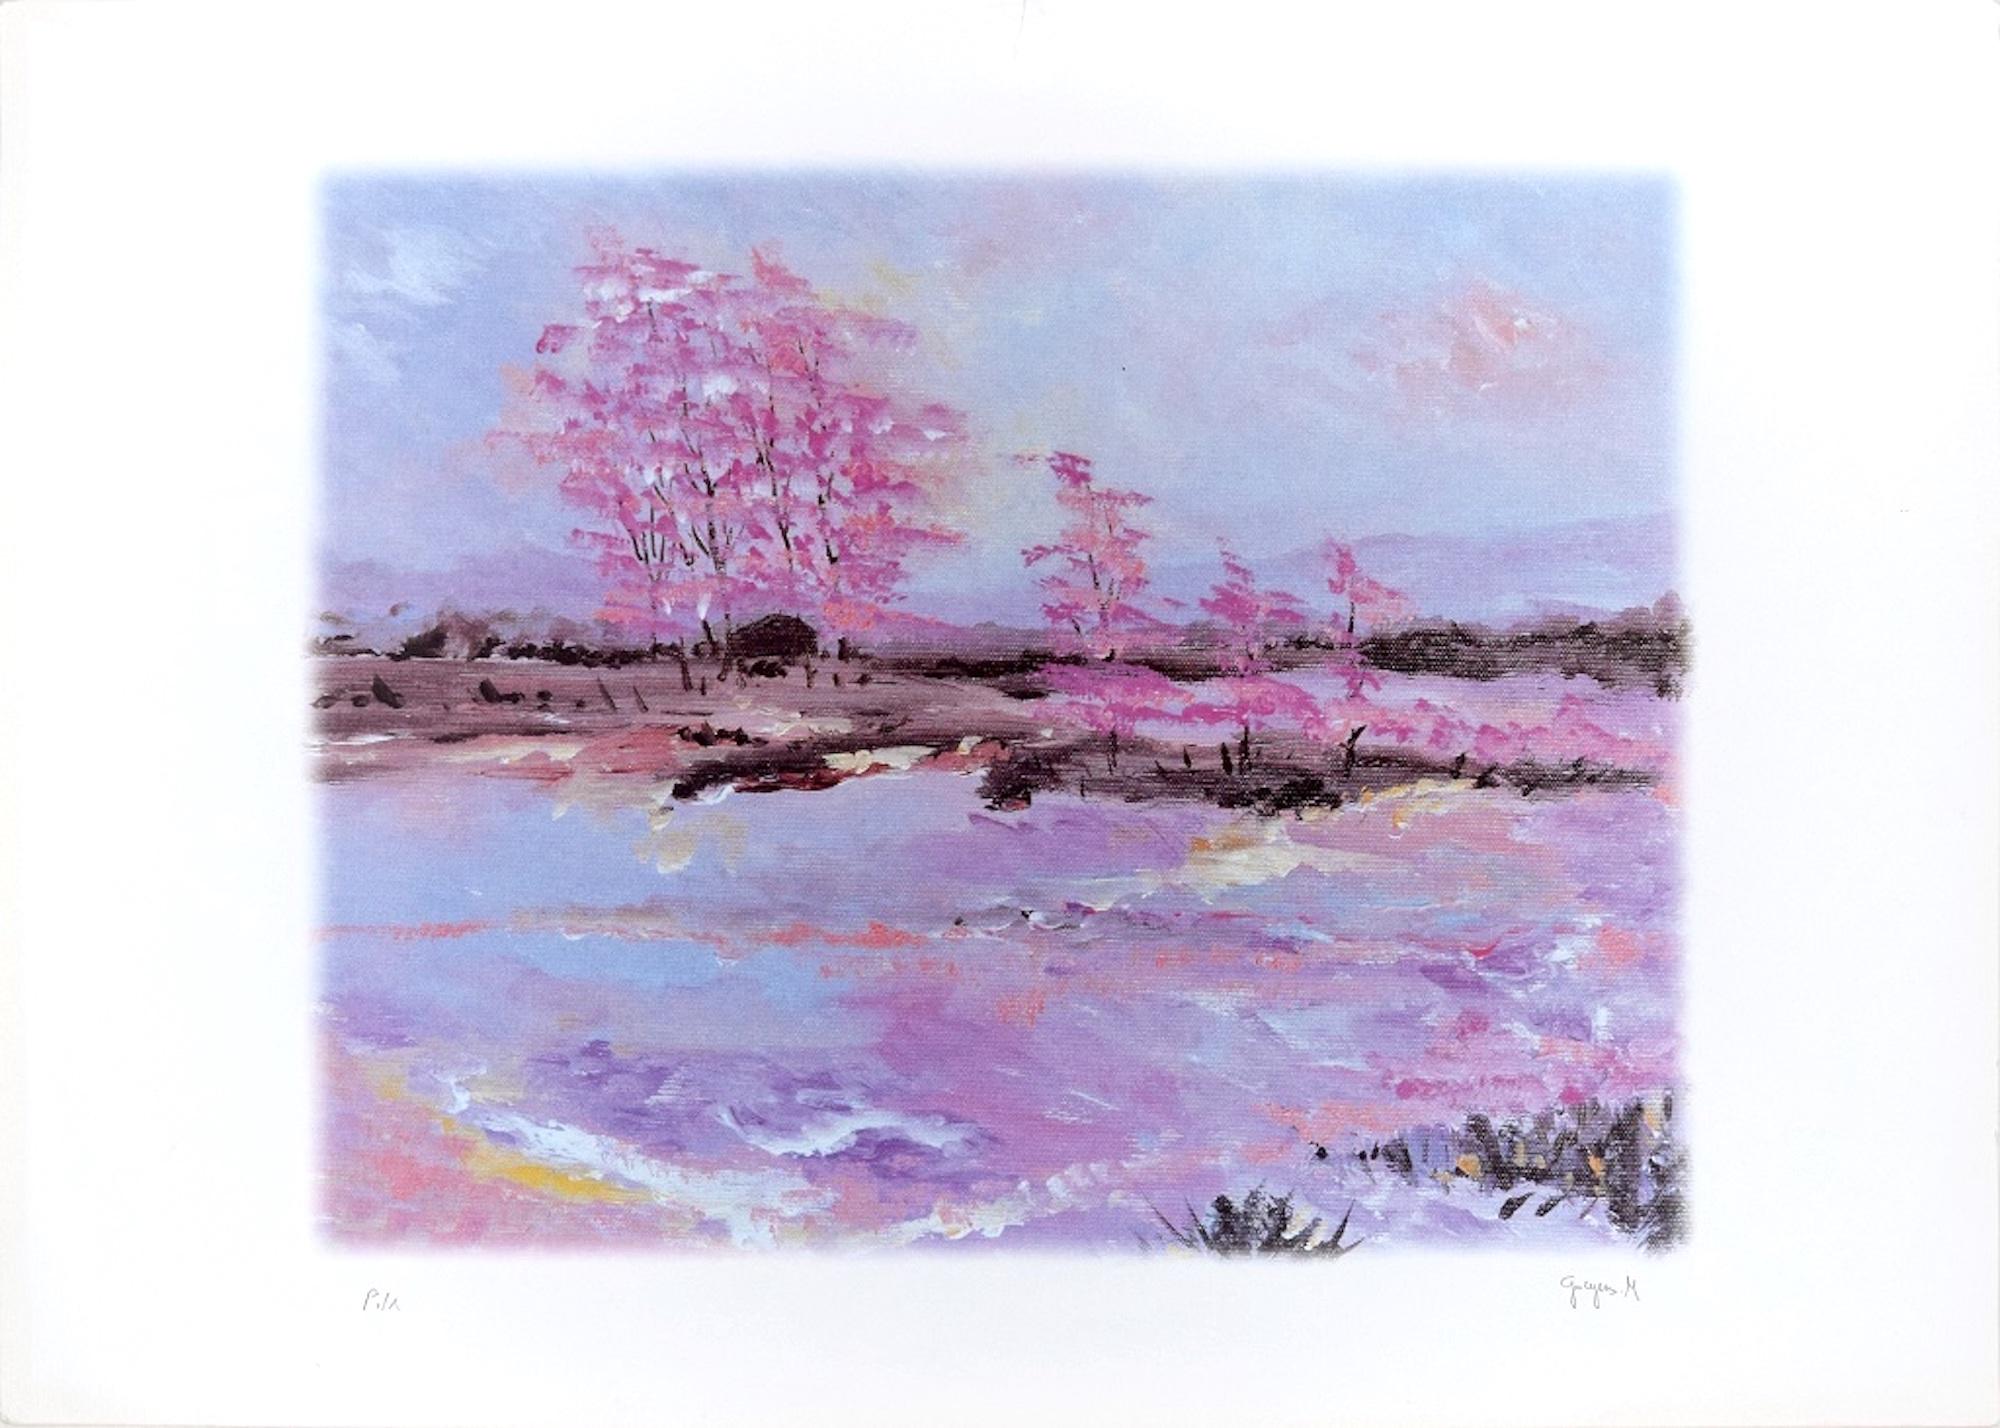 Le Jour se Lève is an original colored lithograph on cream-colored paper print realized by Martine Goeyens in the 2000's.

The contemporary artwork, representing a wonderful natural landscape colored by the pink of the cherry tree is hand-signed in